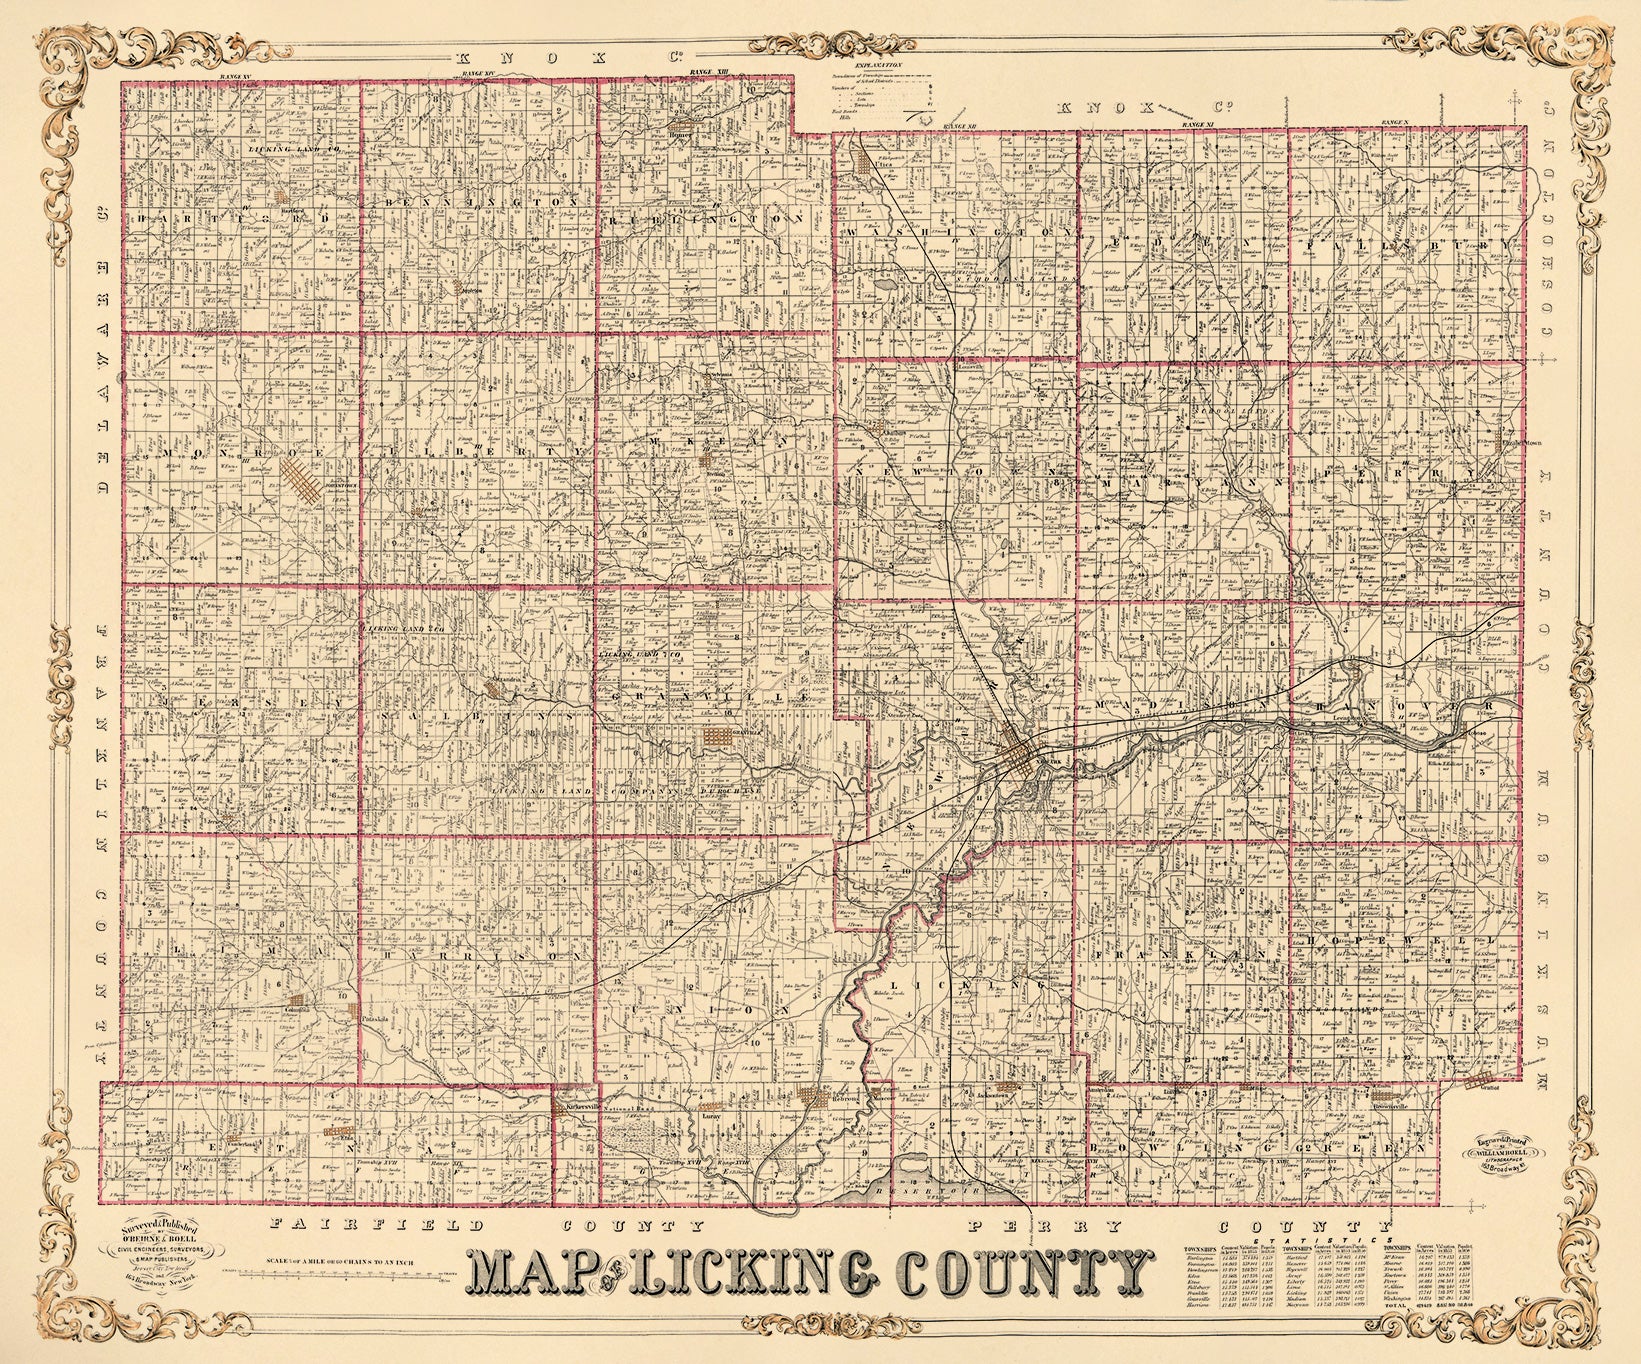 Map of Licking County, Ohio 1854